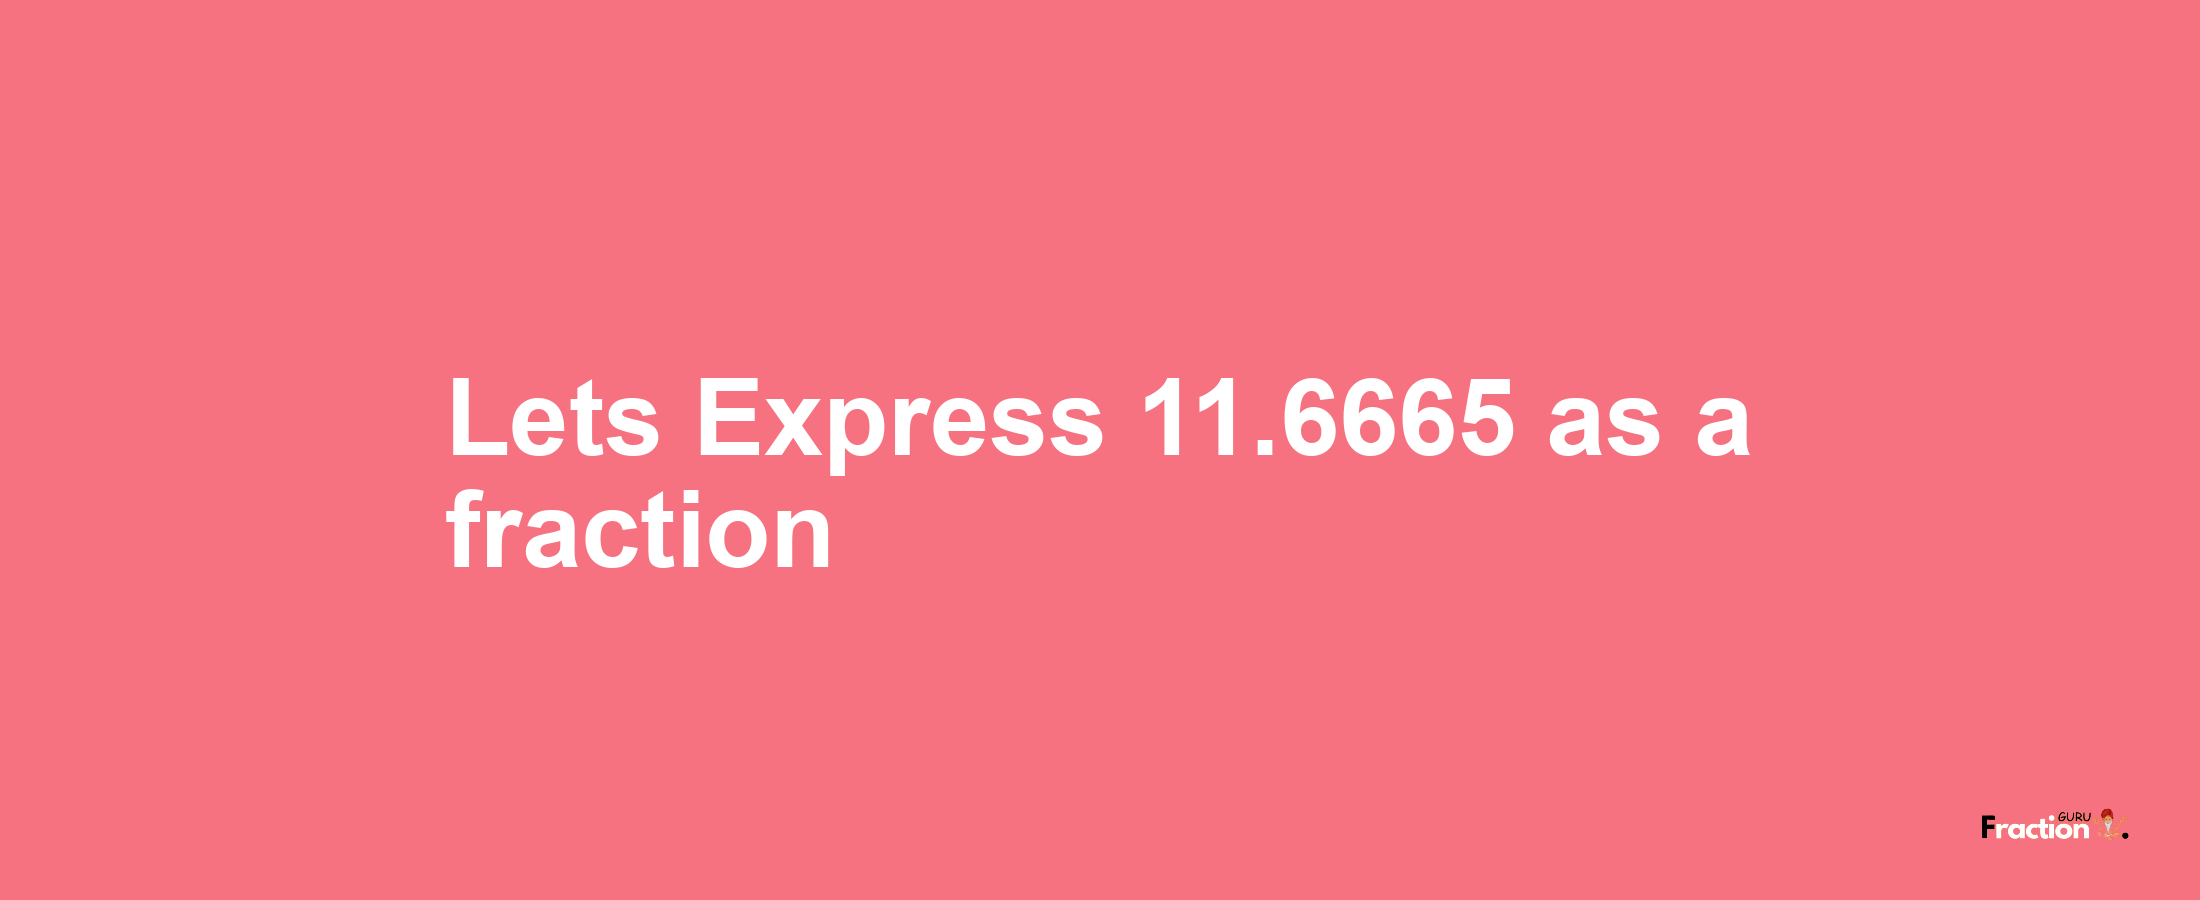 Lets Express 11.6665 as afraction